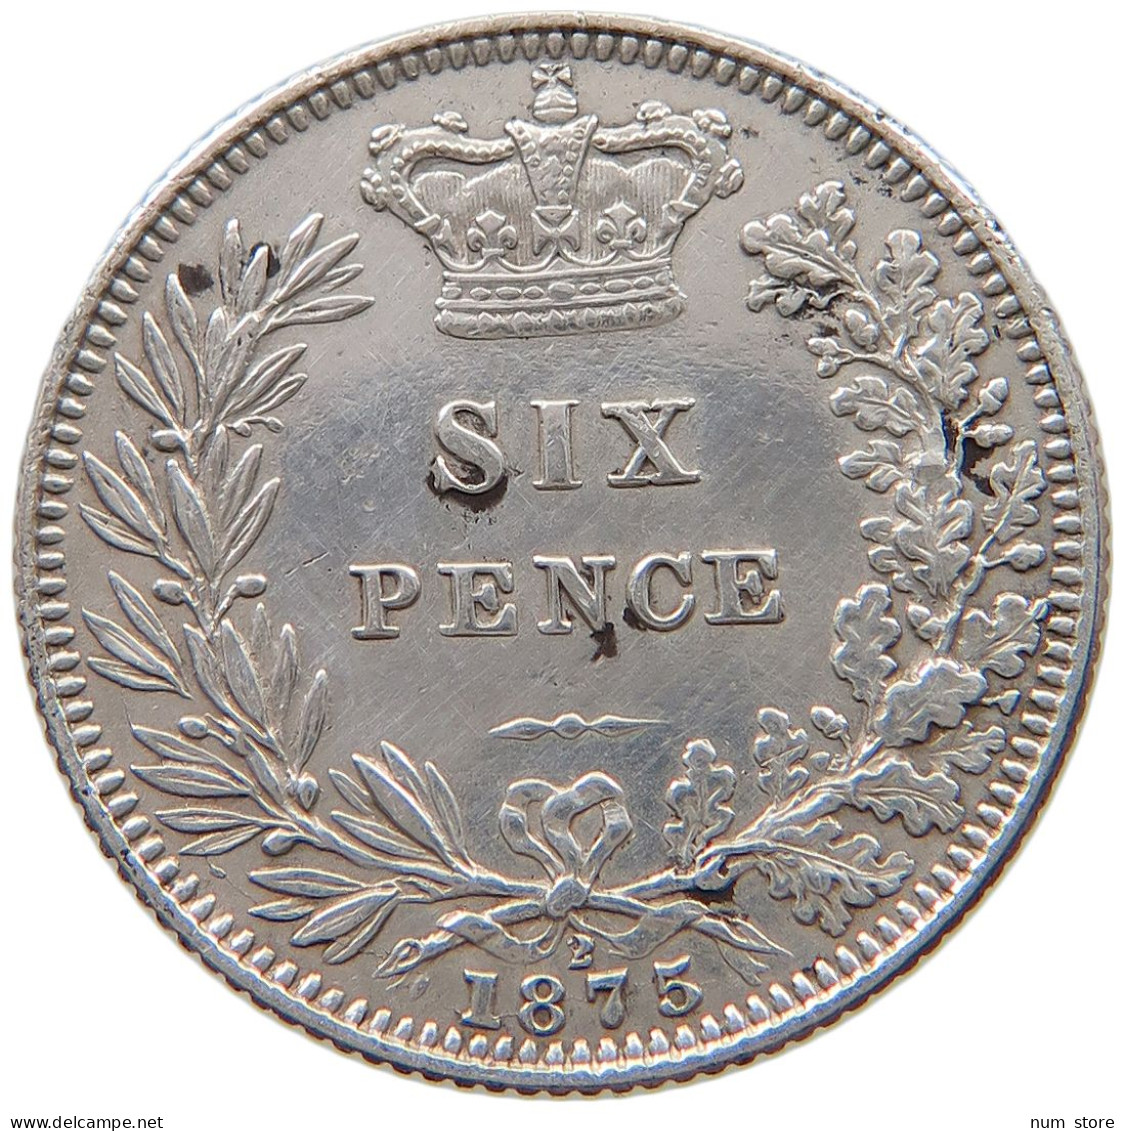 GREAT BRITAIN SIXPENCE 1875 Victoria 1837-1901 #t107 0463 - H. 6 Pence